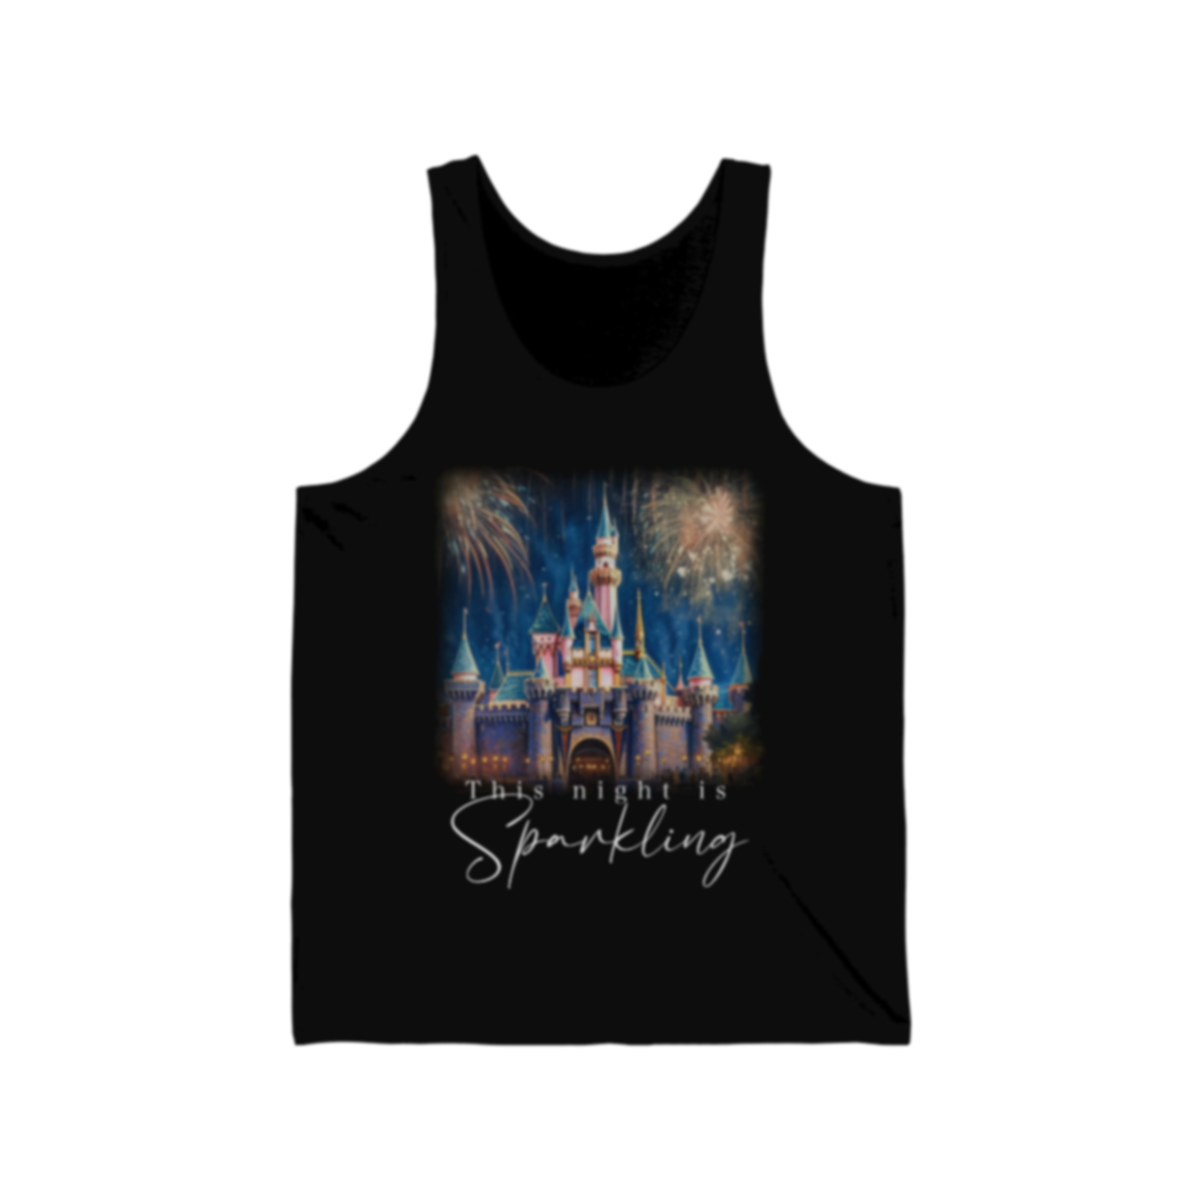 This Night is Sparkling DL Tank Top | Adult Bella+Canvas Unisex